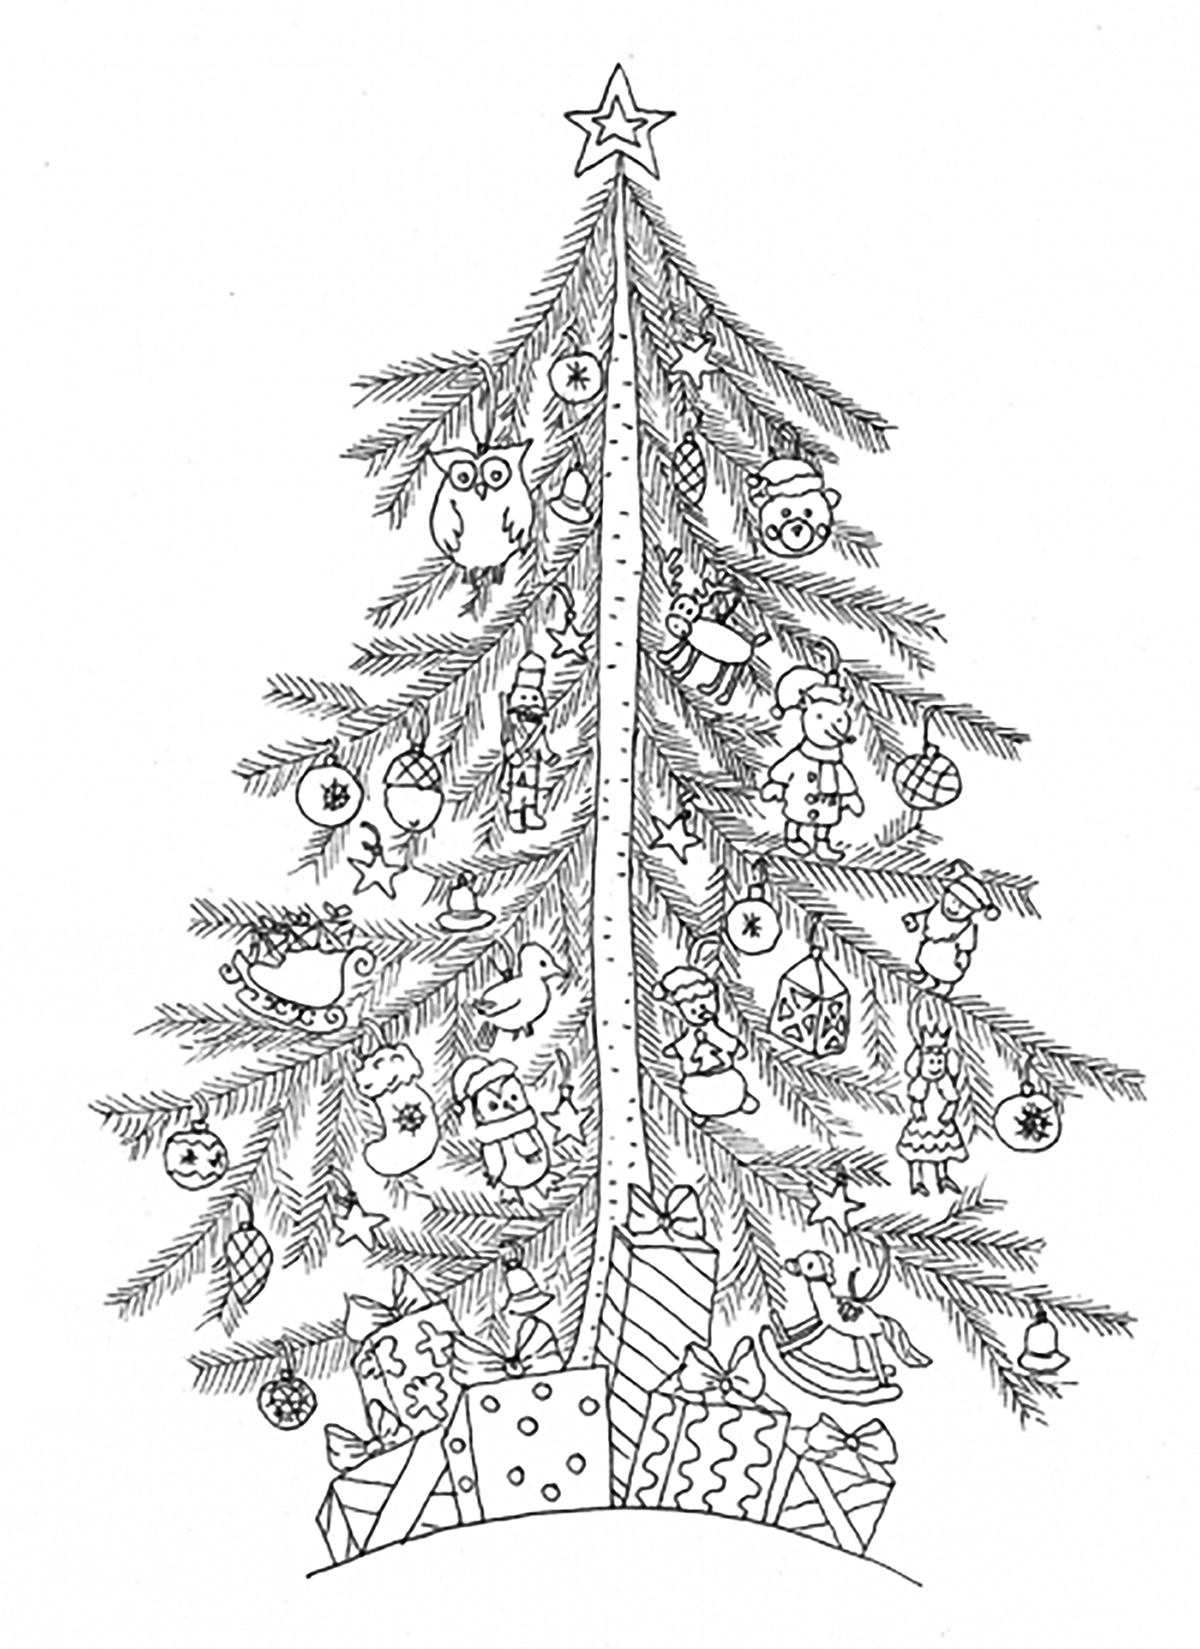 Download Christmas tree - Christmas Coloring pages for kids to ...